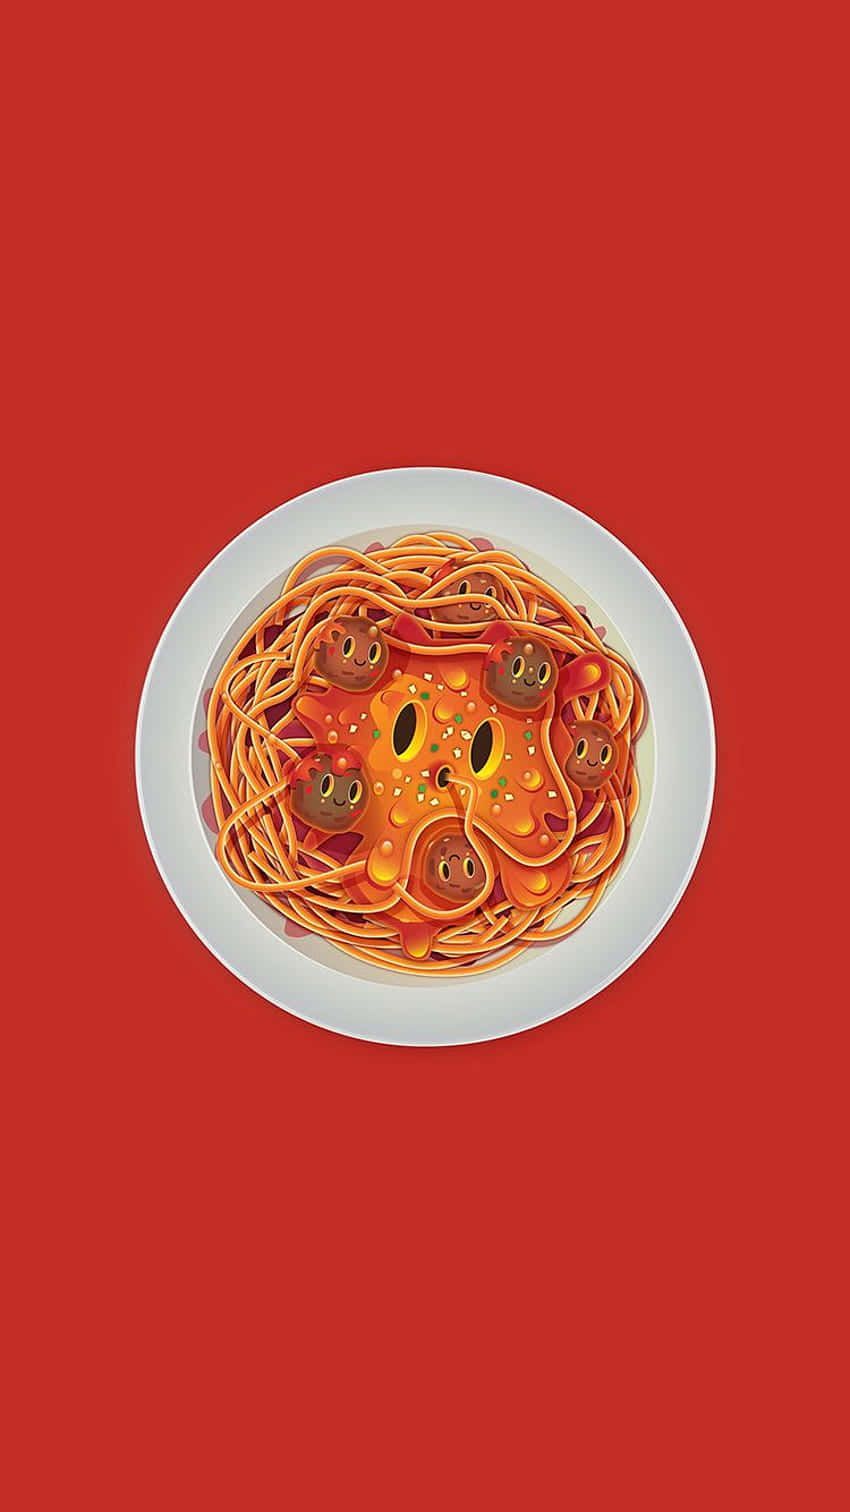 Download Android Pasta Background Cartoon Plate Of Spaghetti